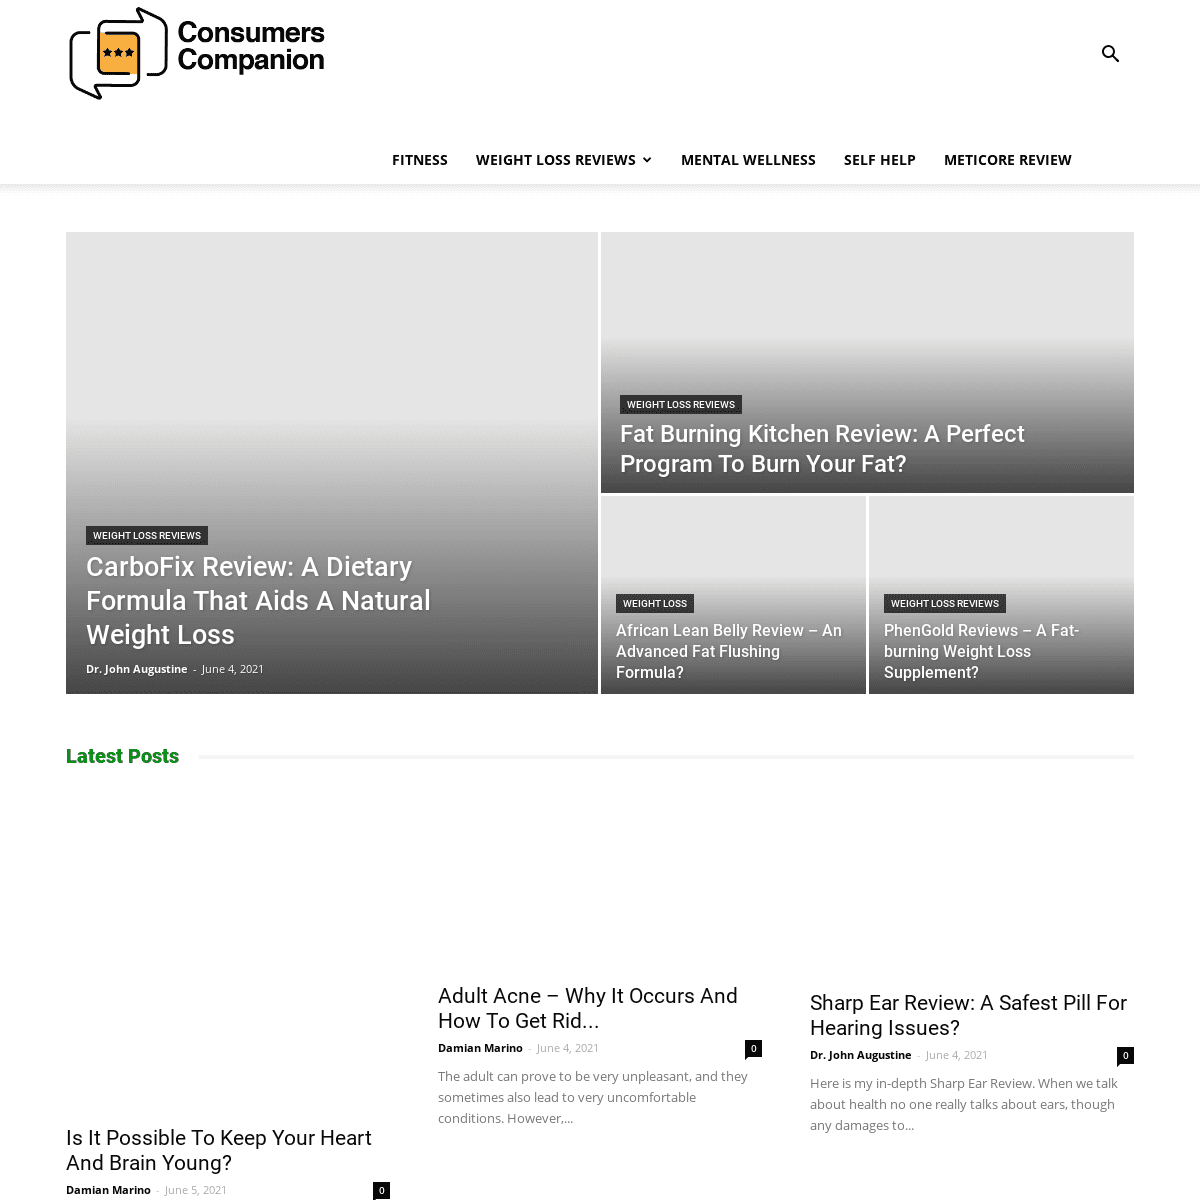 A complete backup of https://consumerscompanion.com